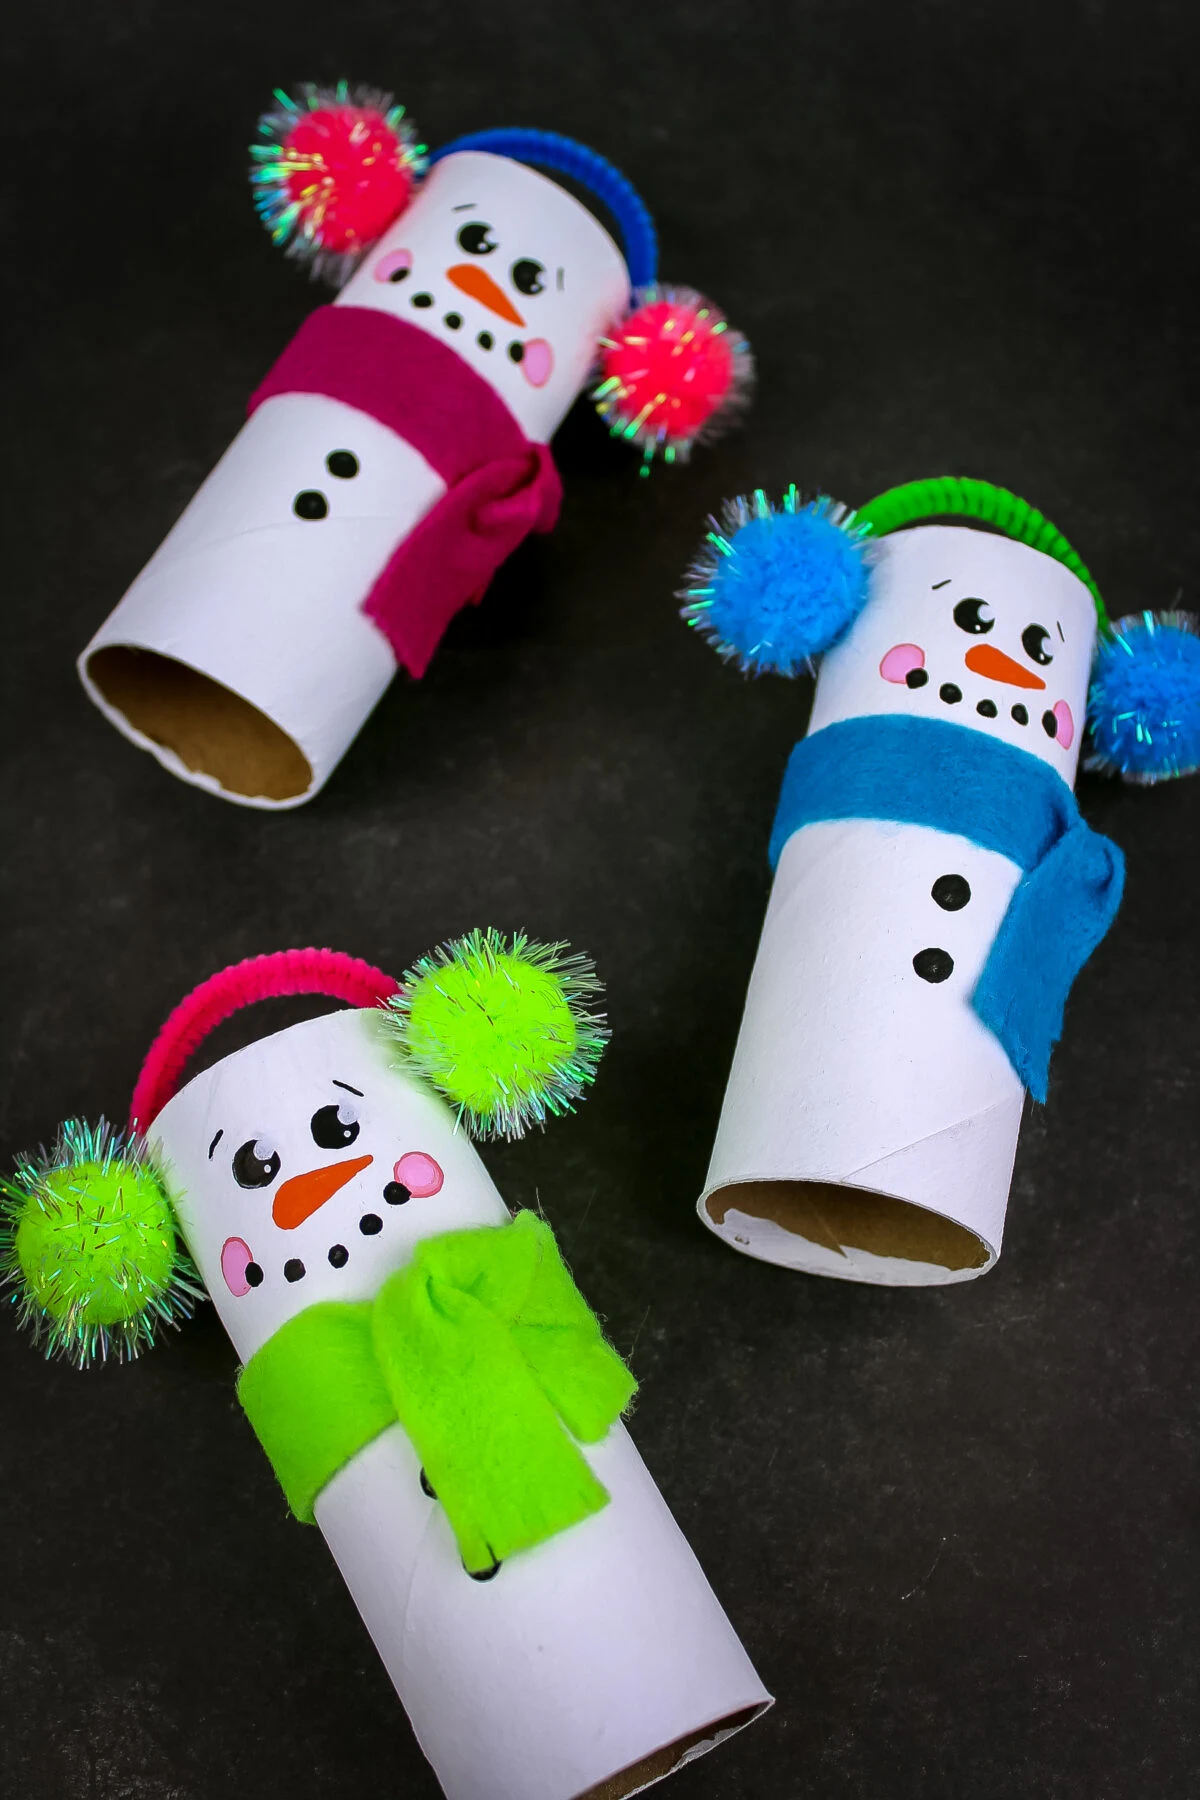 These Recycled Toilet Paper Tube Snowmen are perfect for displaying this holiday season and would make awesome keepsake gifts.